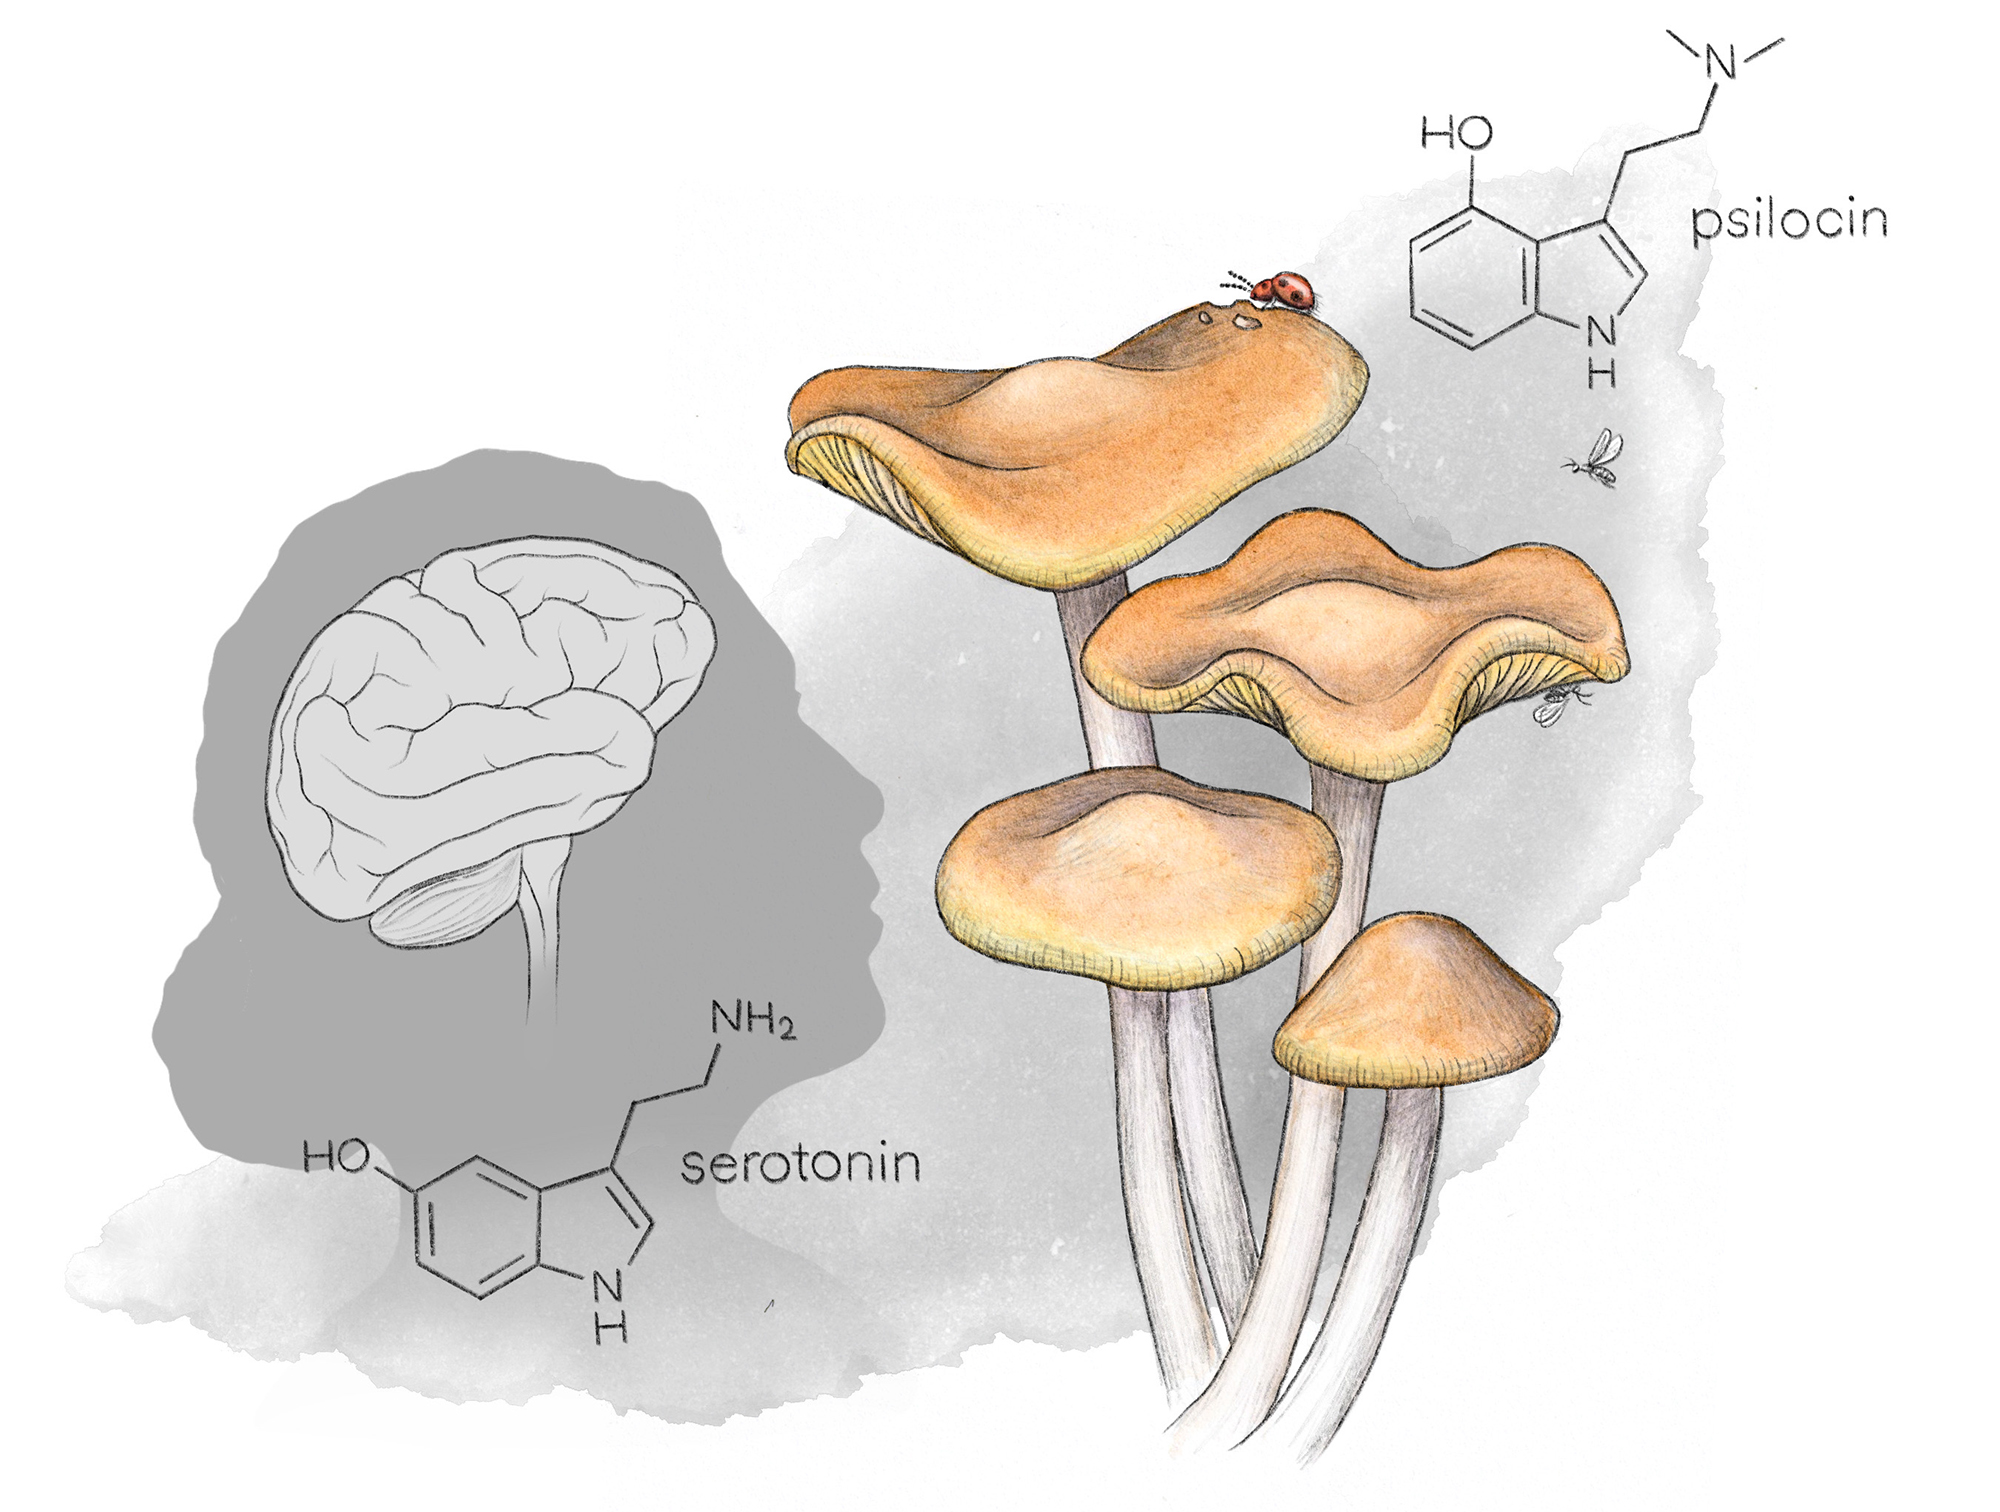 cartoon image of mushrooms and their chemical structure